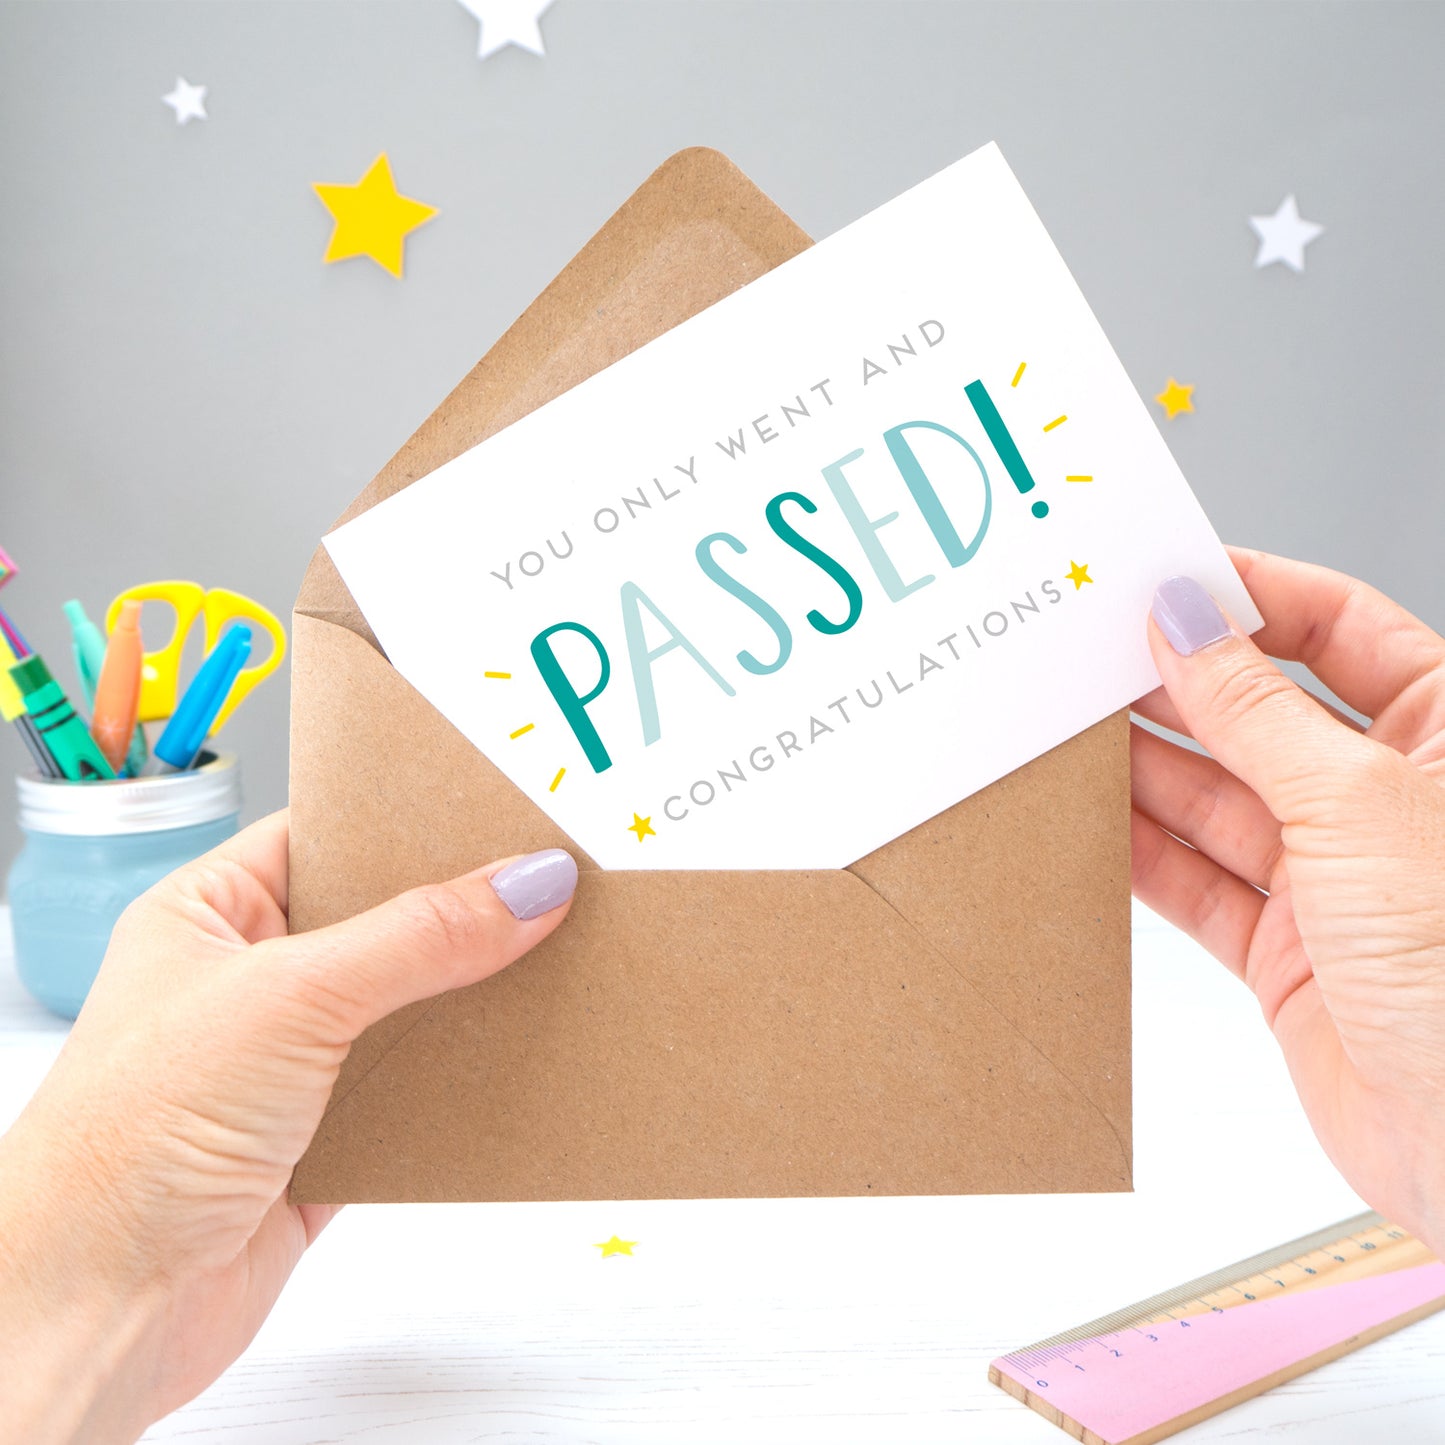 'You only went and passed! Congratulations!' A congratulations card for someone who has completed their exams recently. It features grey text with the word 'passed' in a hand lettered font with varying tones of blue and yellow stars.